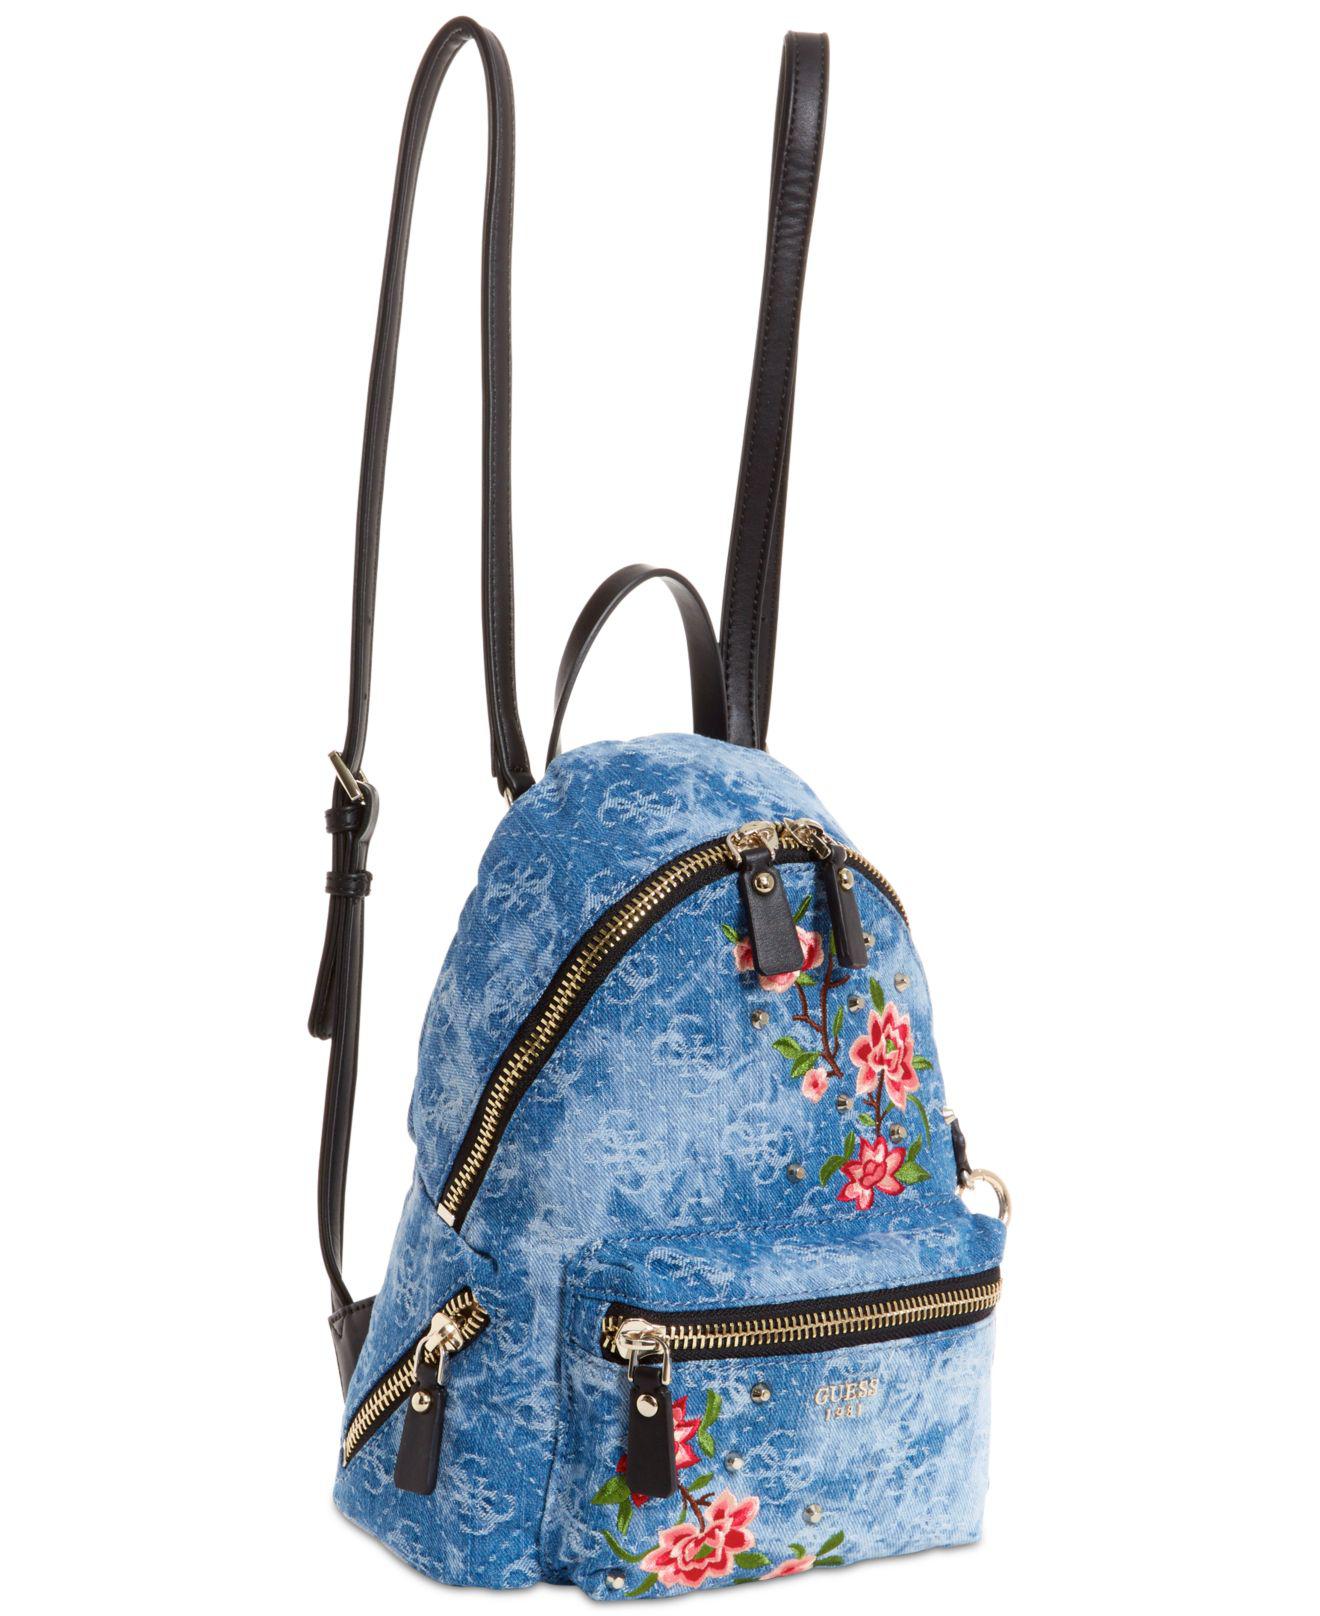 Guess Cool School Denim Small Backpack in Blue - Lyst